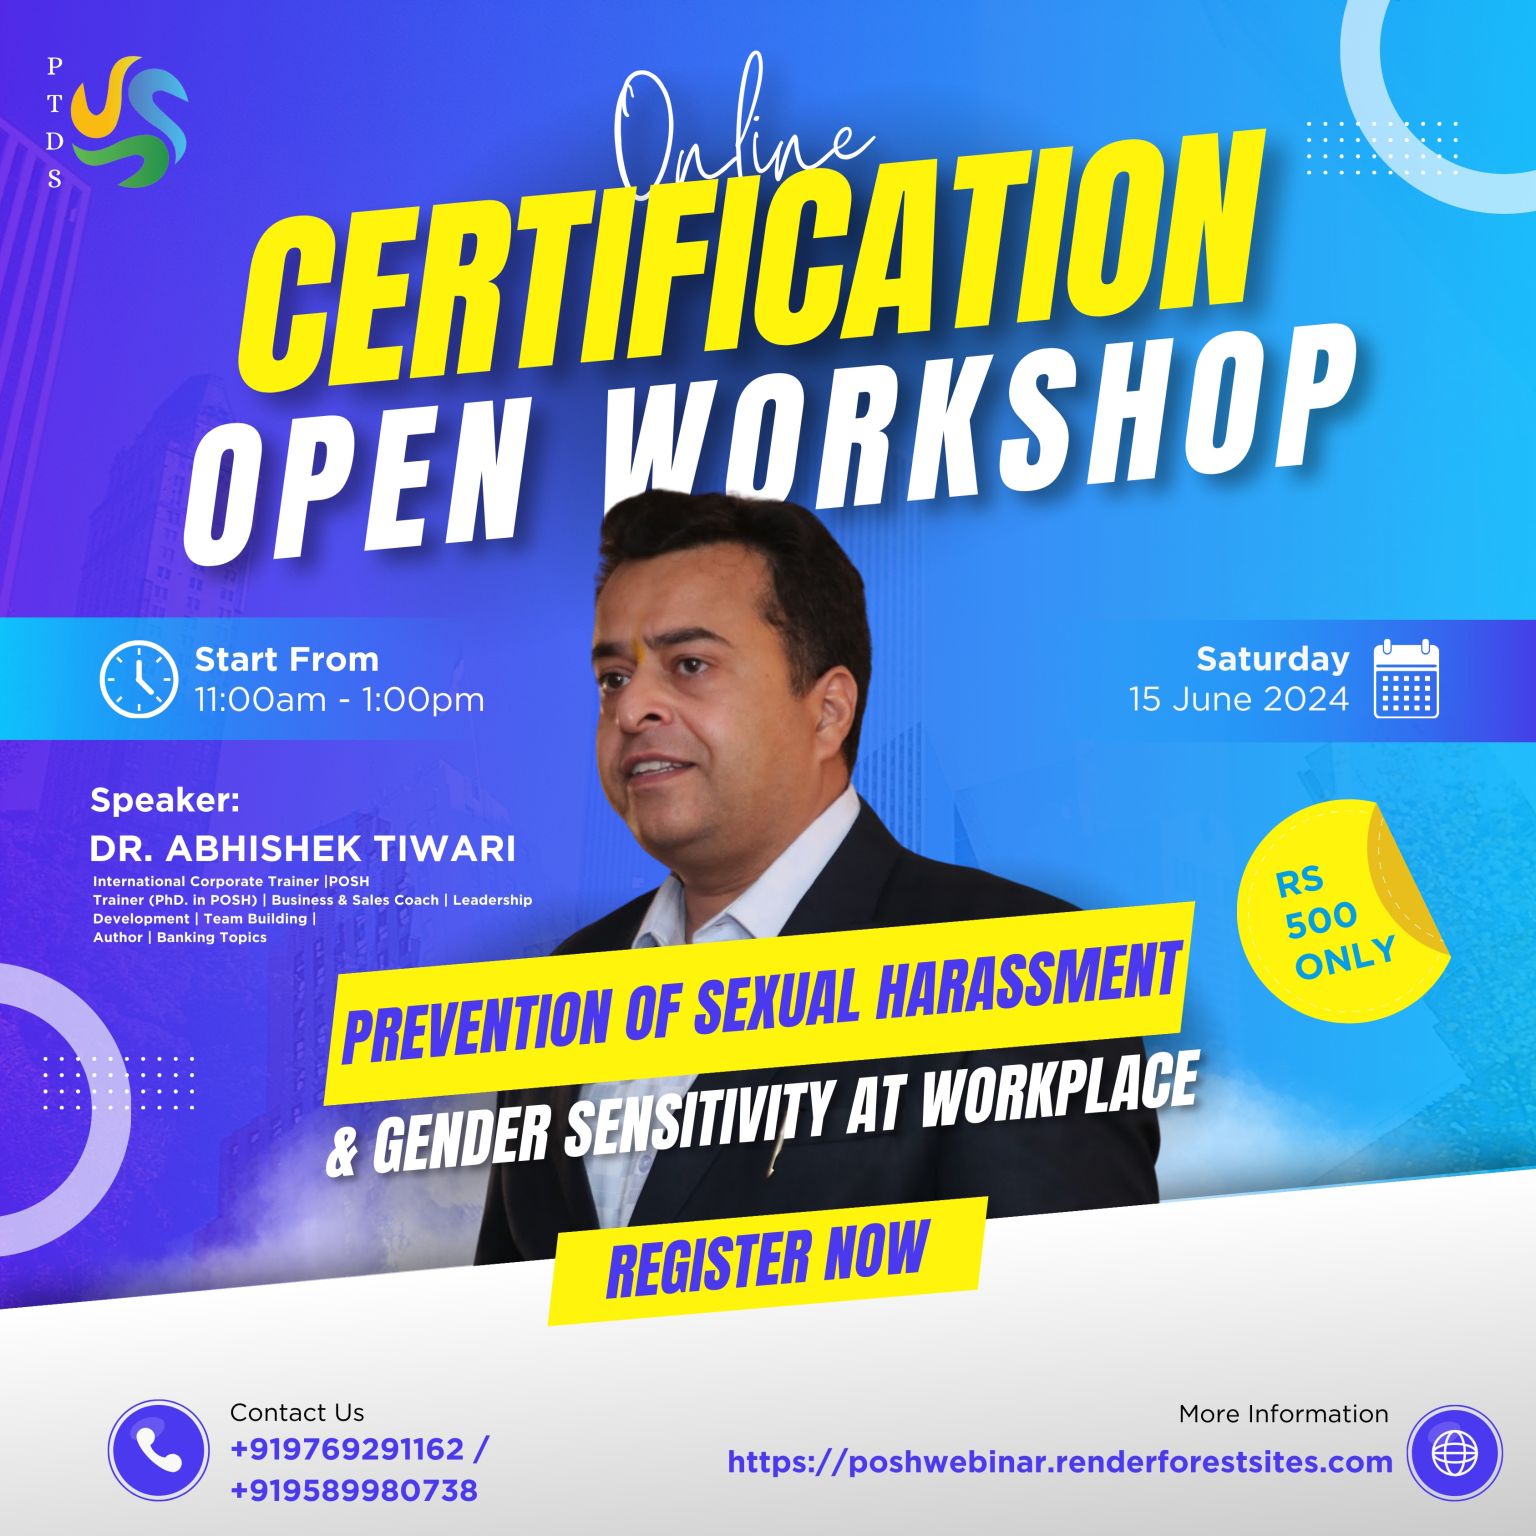 Prevention of Sexual Harassment and Gender Sensitivity at Workplace Online Certification Open Workshop, Online Event